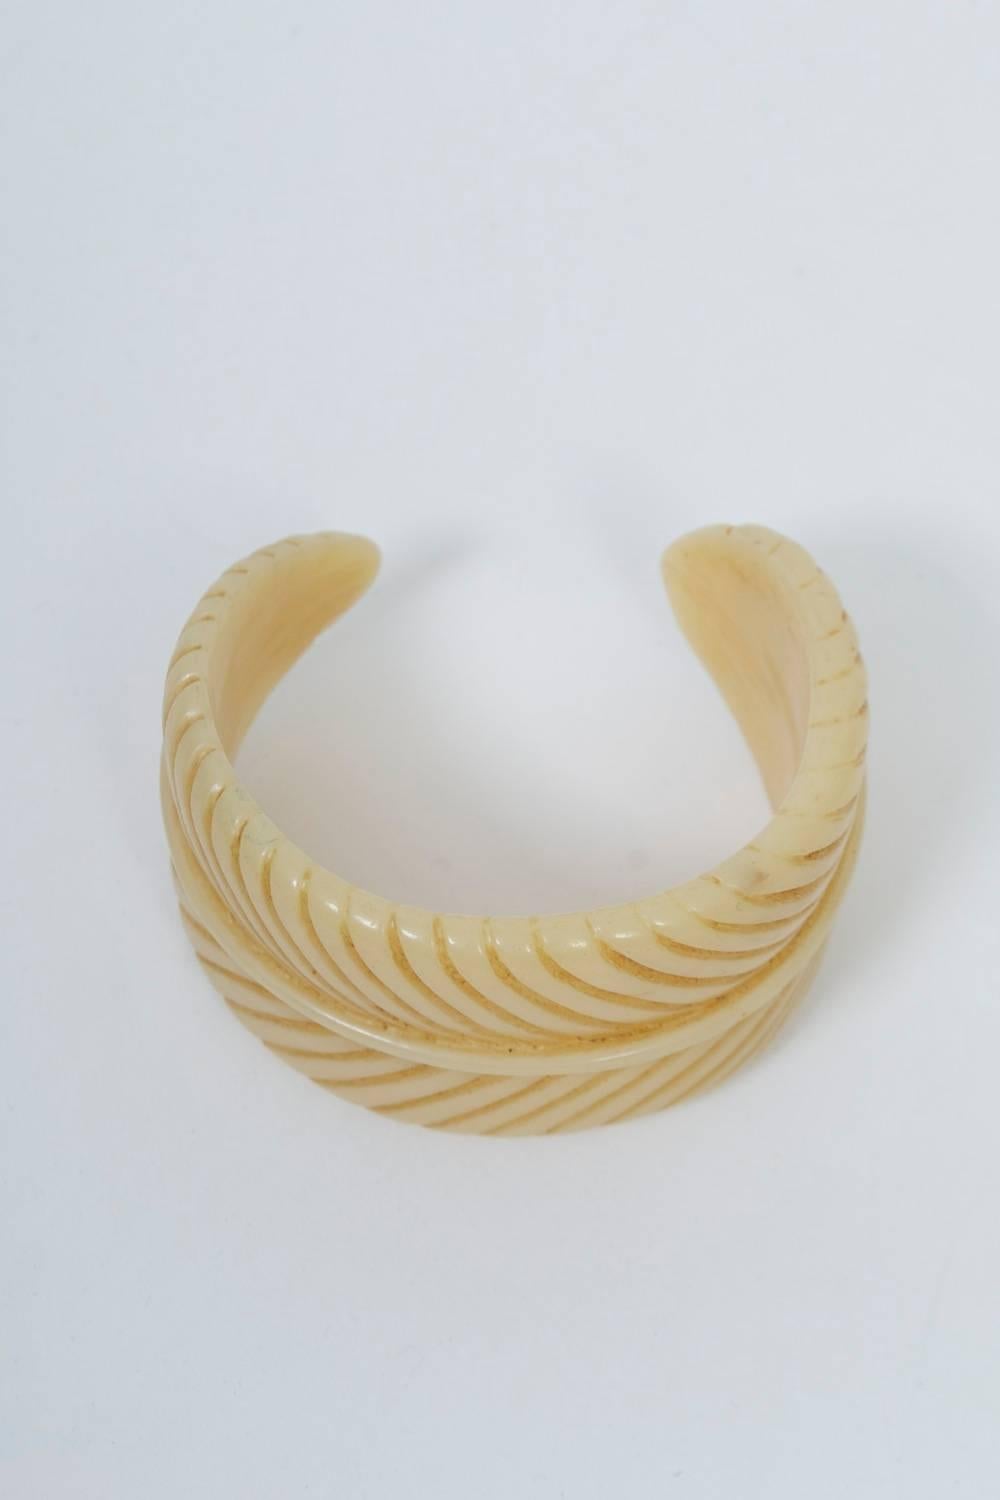 Vintage ivory Bakelite cuff carved as a leaf, a rib runnng down the center with diagonal channels on each side. 1.75